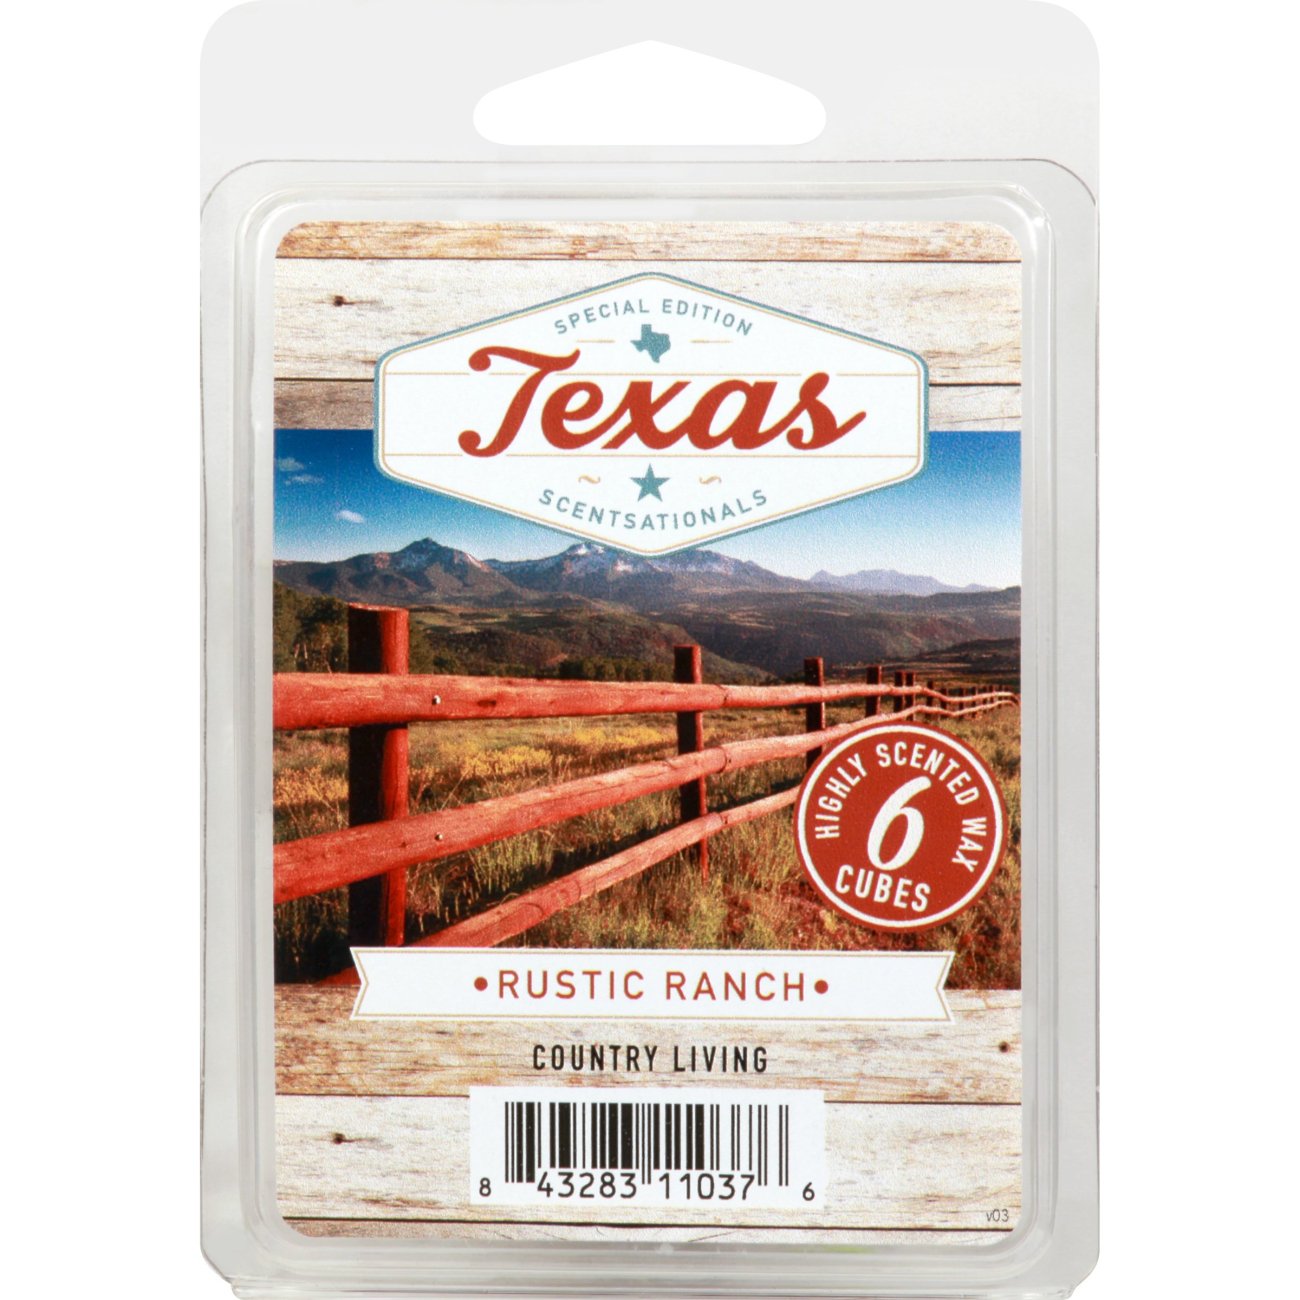 ScentSationals Memory Sage & Bergamot Scented Wax Cubes, 6 Ct - Shop  Scented Oils & Wax at H-E-B